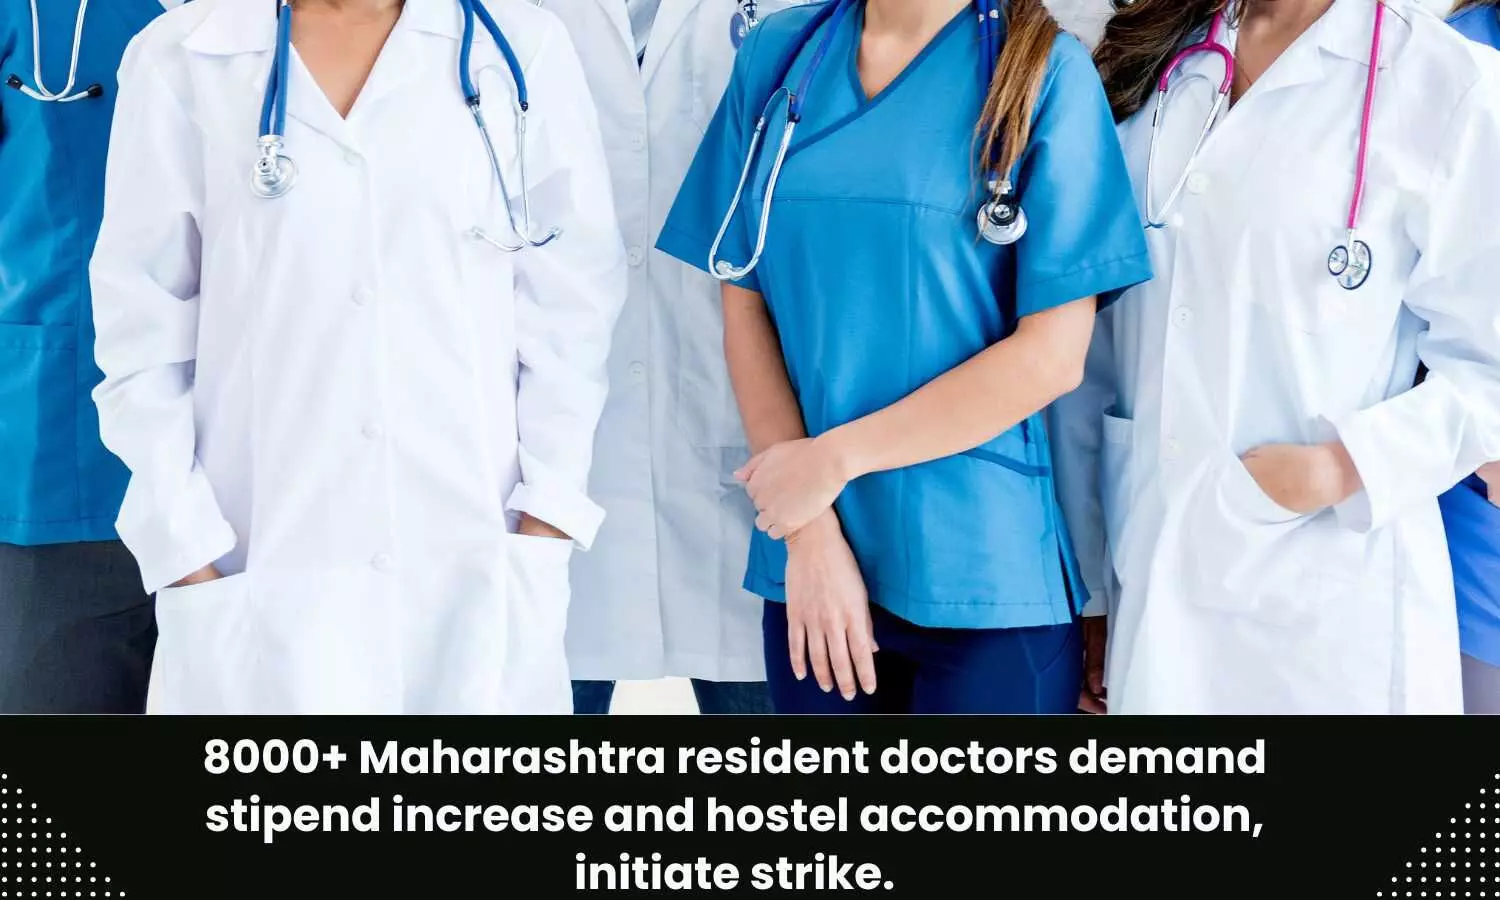 Around 8000 Maha resident doctors on indefinite strike over unfulfilled demands